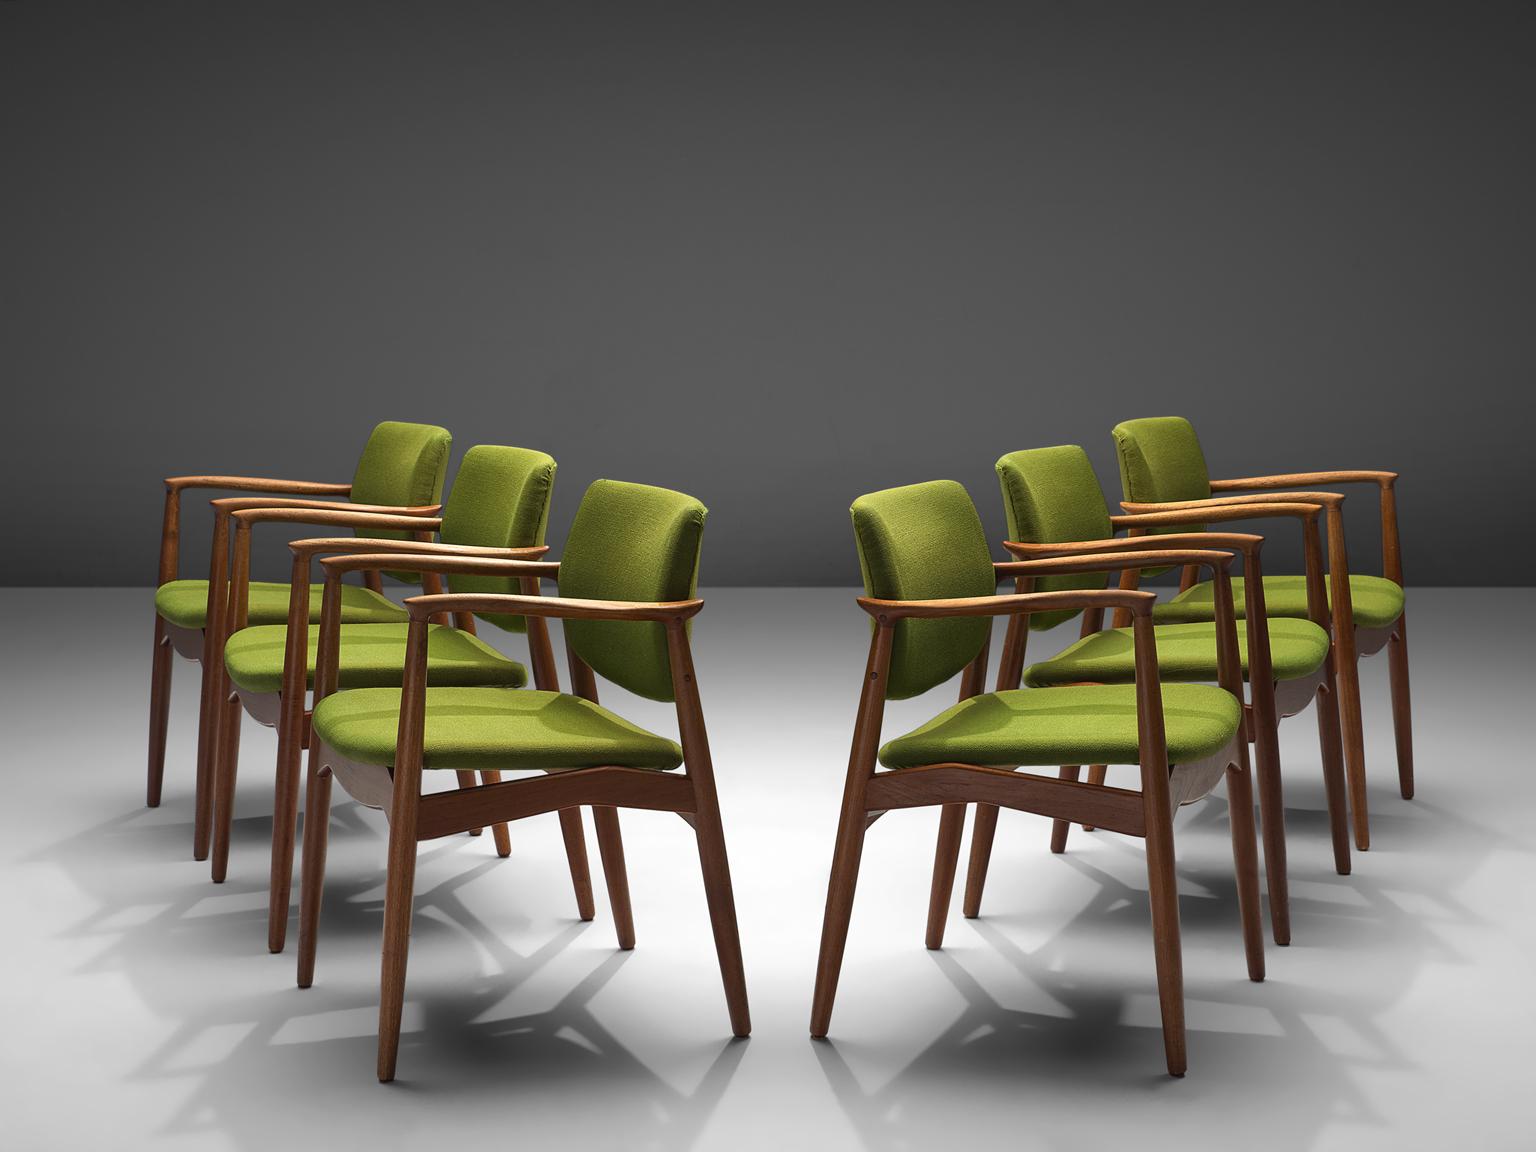 Erik Buch, set of six 'Captain' armchairs, green fabric and teak, Denmark, 1950s.

Set of six sculpted dining chairs in solid teak. These chairs show the characteristics of the well-known model 50 by Erik Buck. Yet this model has a more refined and